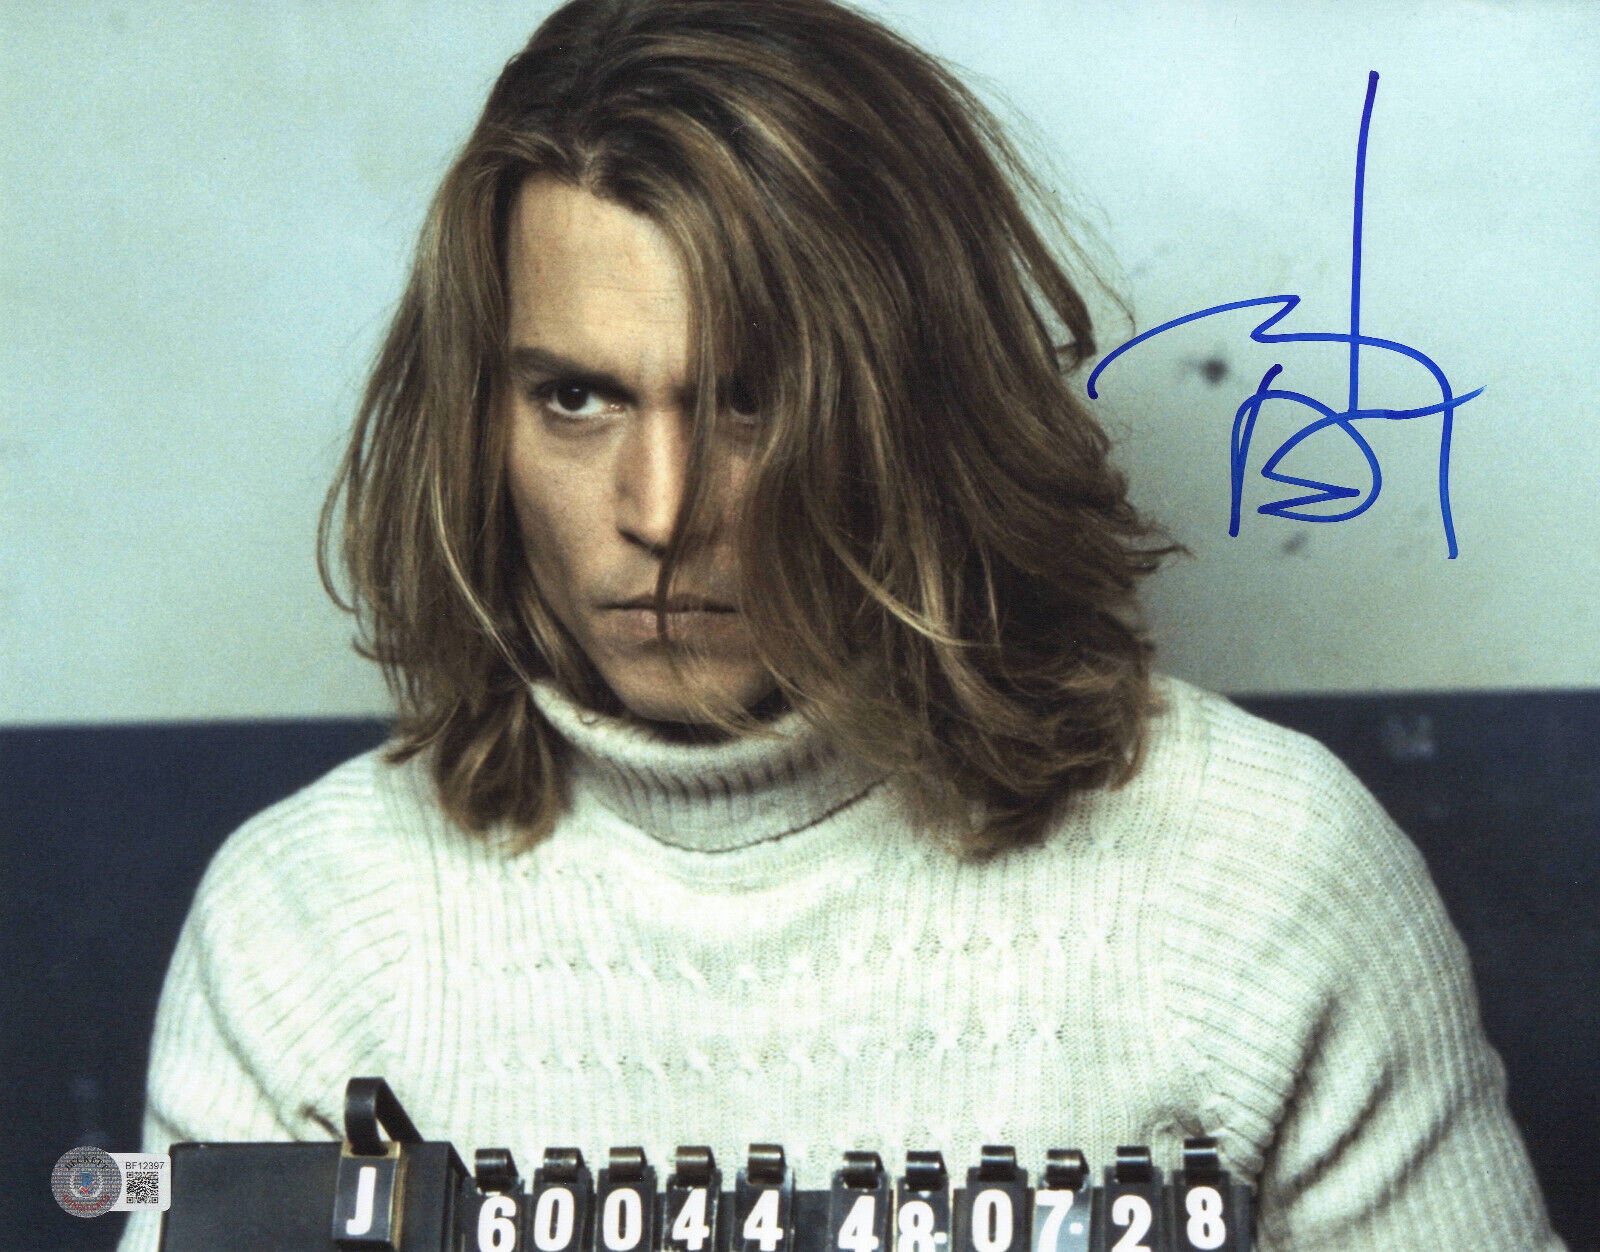 JOHNNY DEPP SIGNED BLOW 'GEORGE JUNG' 11X14 PHOTOAUTHENTIC AUTOGRAPH BECKETT 